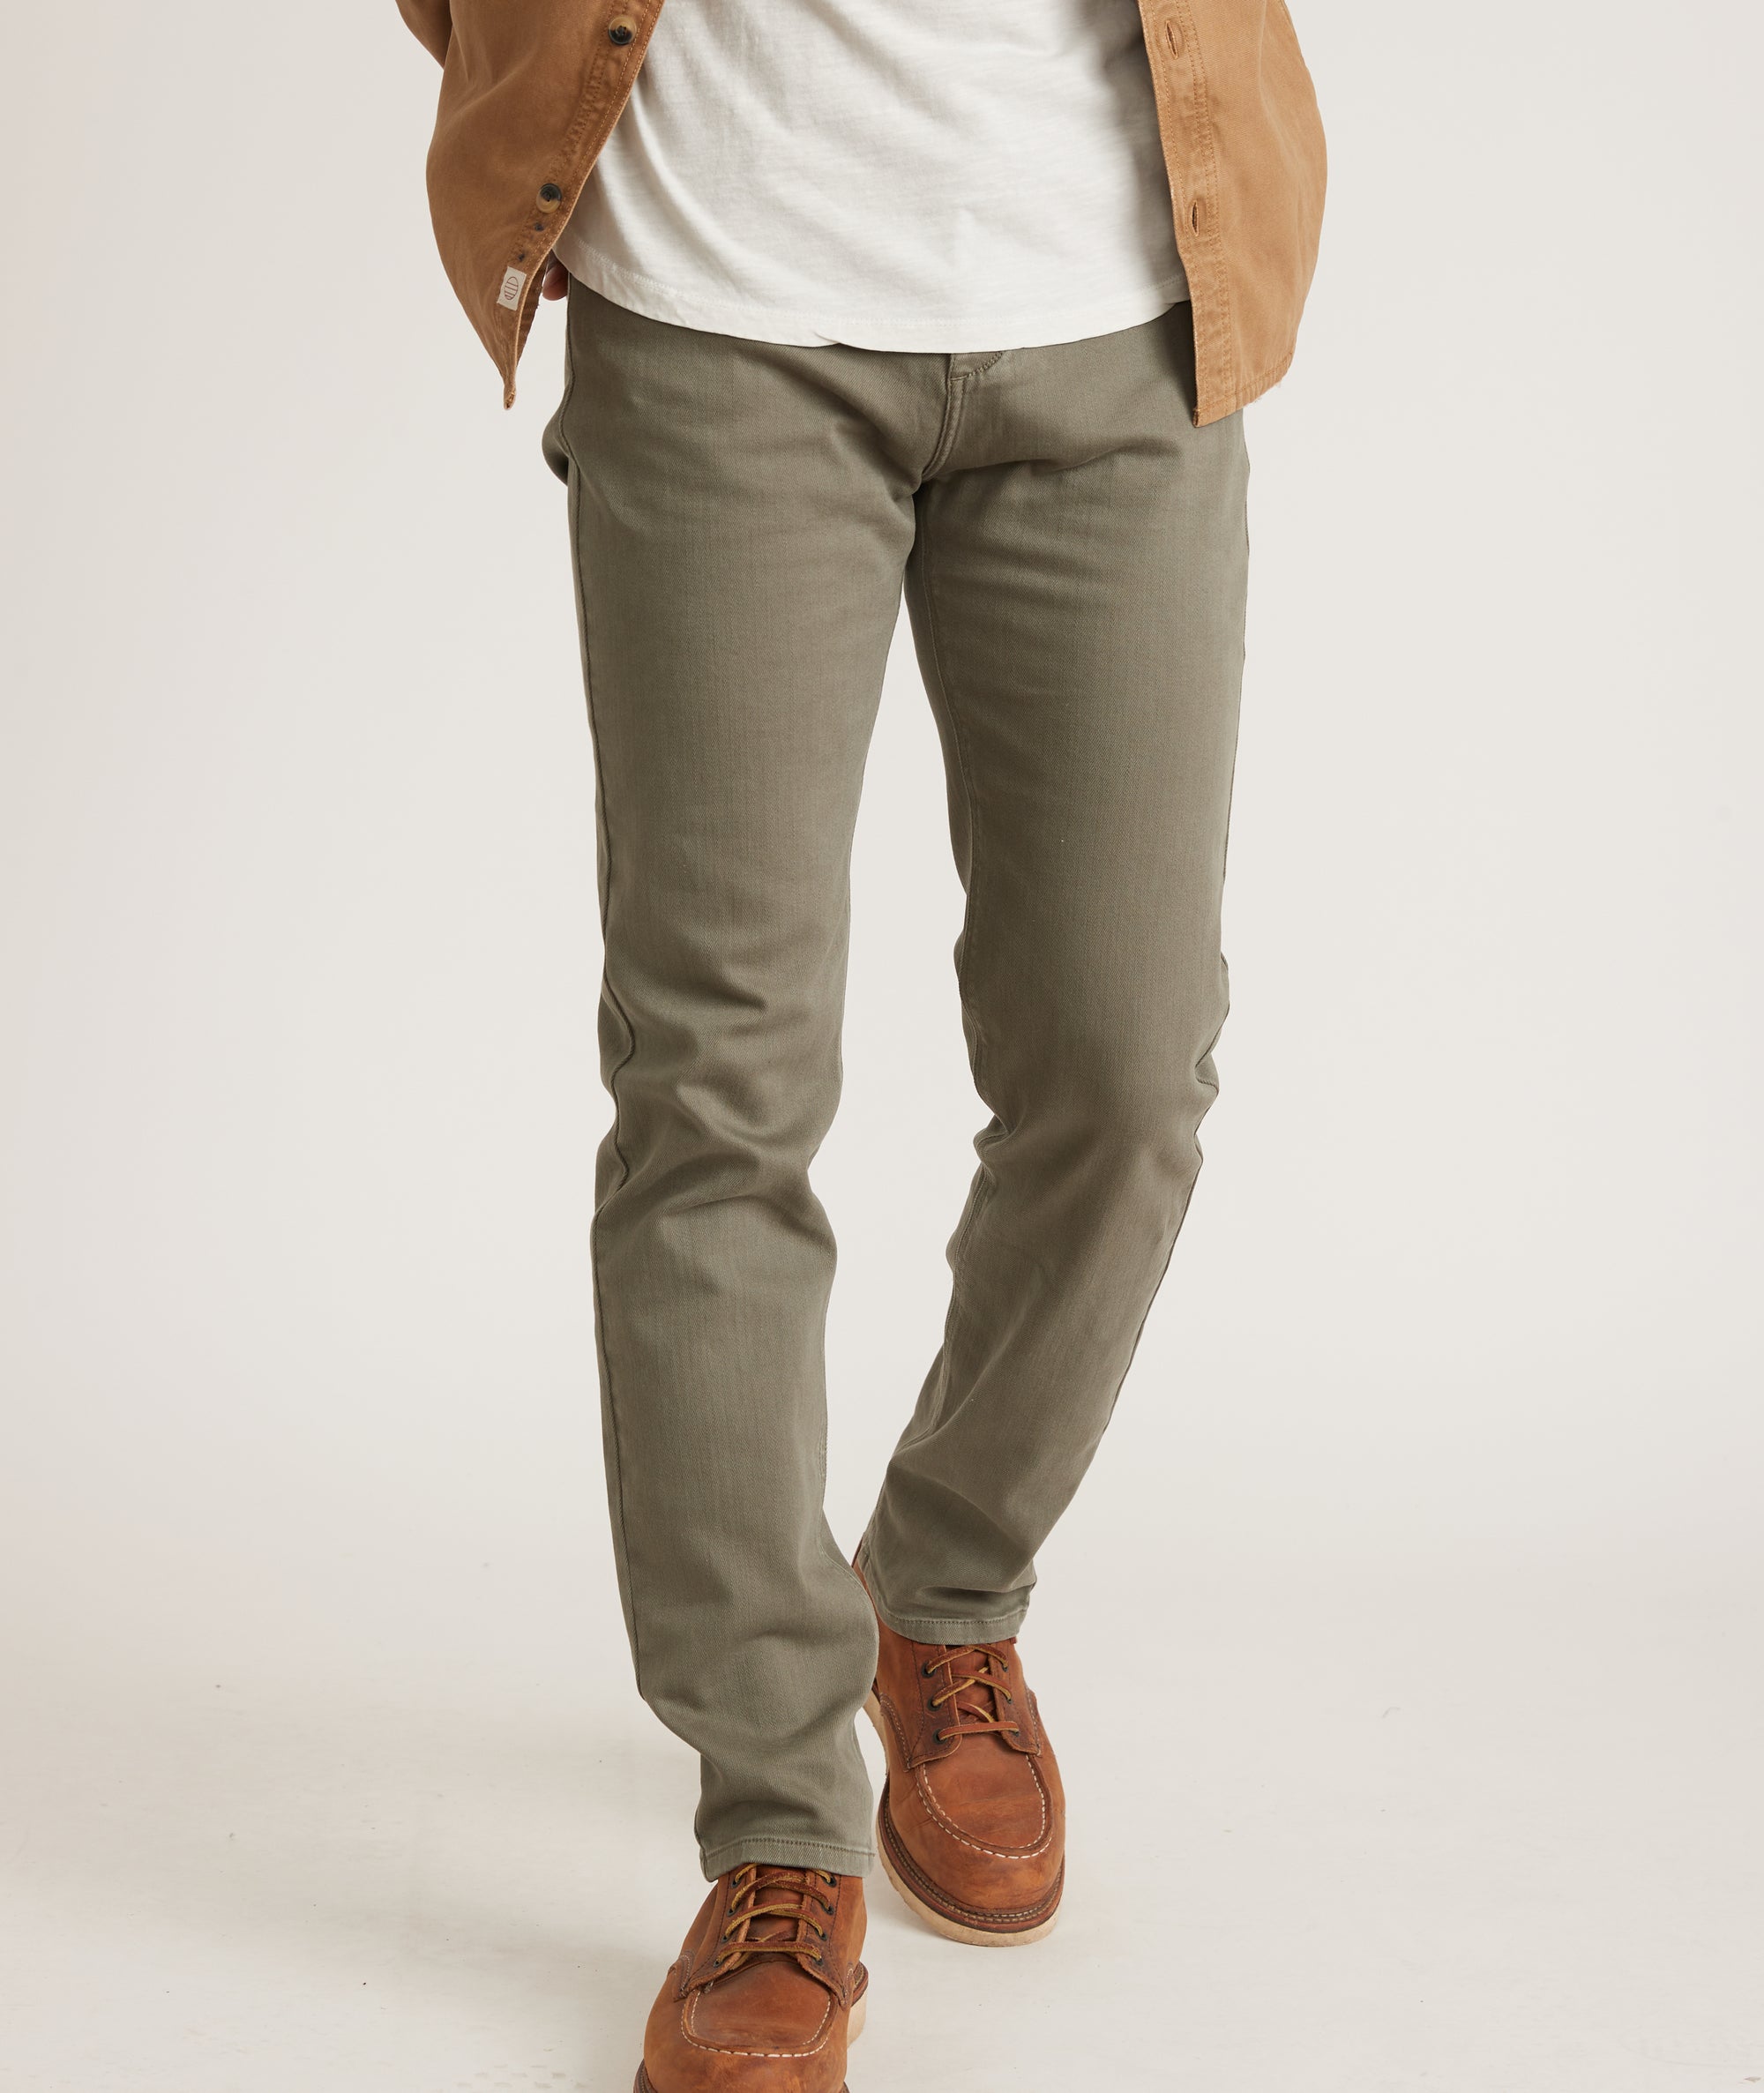 5 Pocket Pant Fit Olive in Marine – Faded Layer Slim